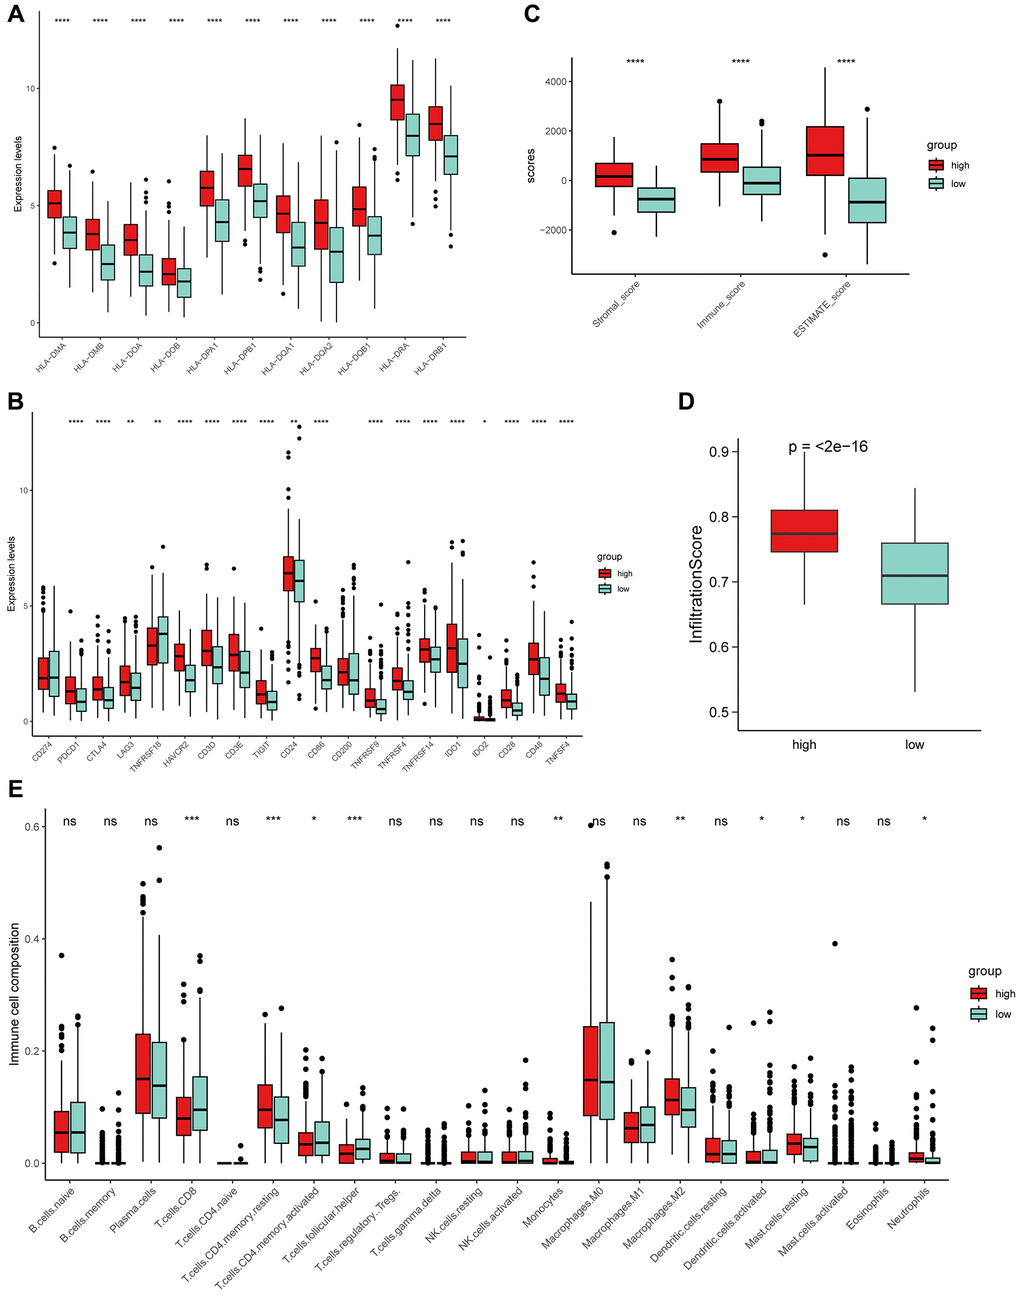 The exploration of PRS and tumor microenvironment (TME). (A) MHC-II molecules were highly expressed in high PRS patients. (B) Similarly, almost all immune checkpoints (ICs) were highly expressed in high PRS patients. Boxplot showed the high PRS patients had significantly higher infiltration levels of TME using ESTIMATE (C) and ImmuCellAI (D) algorithm. (E) Two types of PRS patients exhibited distinct immune cell populations. Wilcoxon test, *P **P ***P ****P 